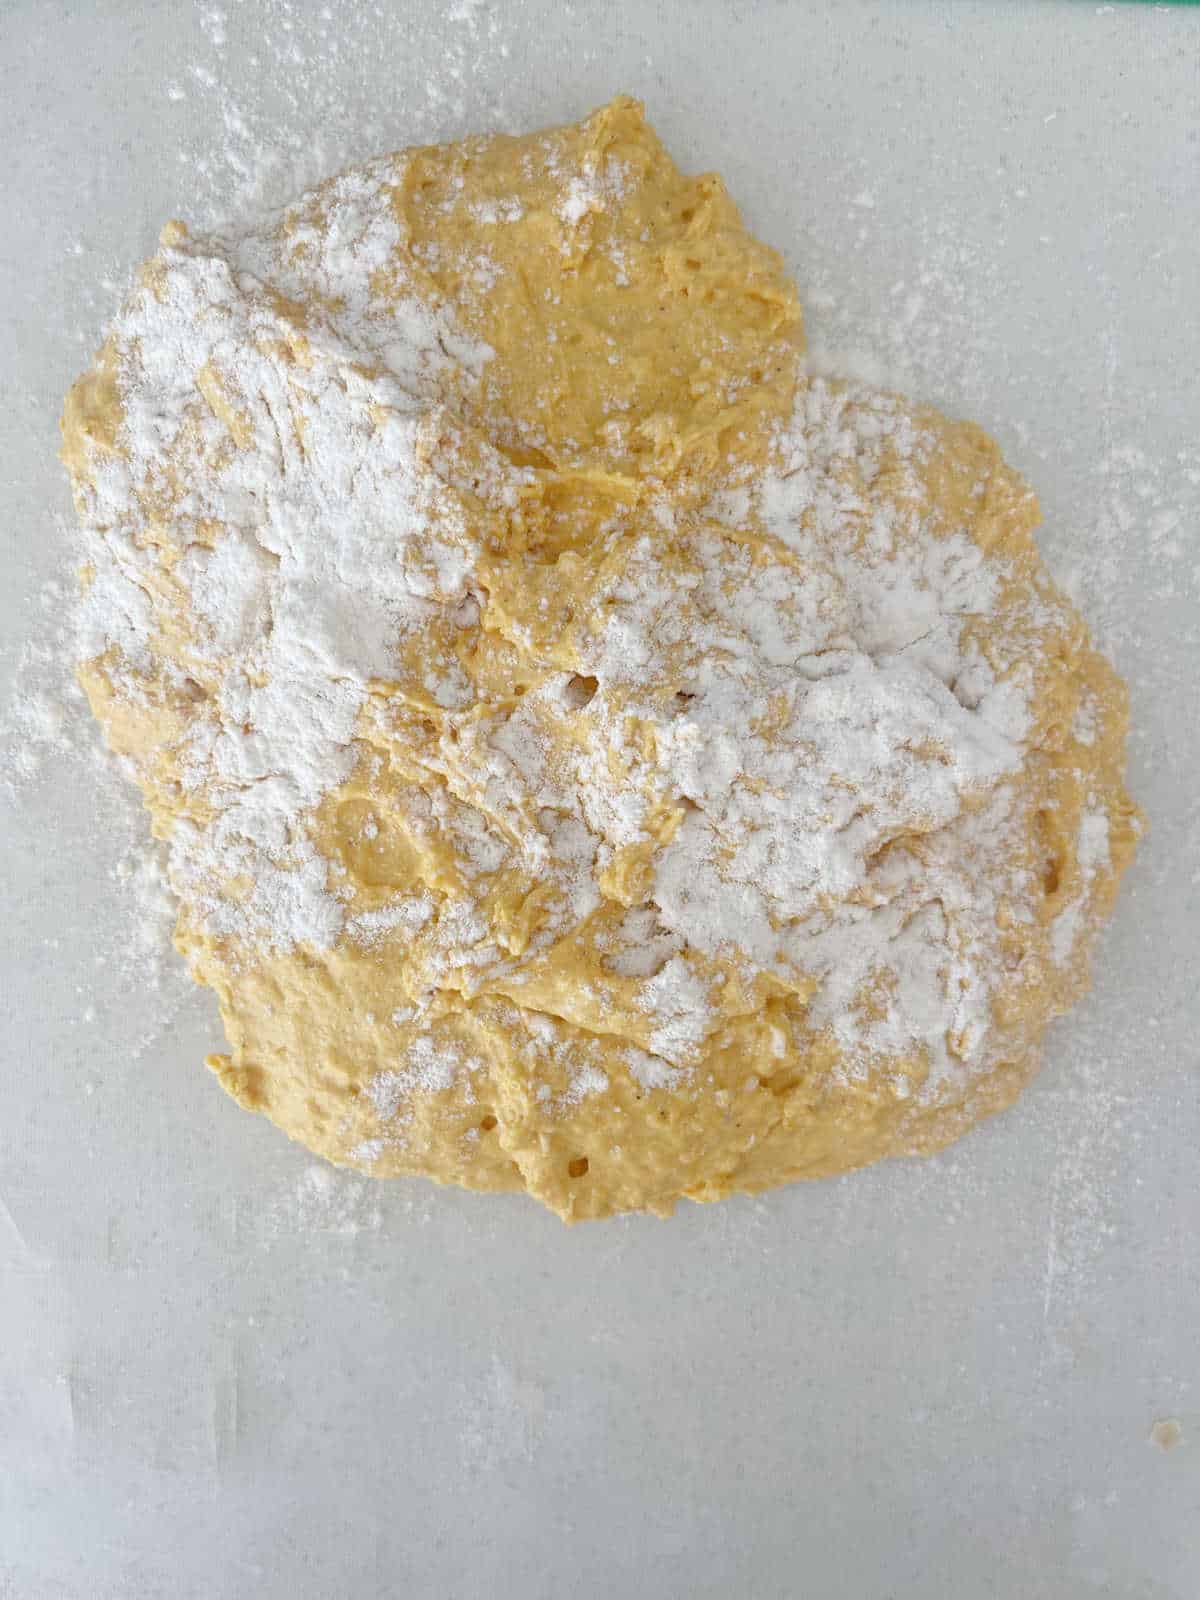 Pumpkin Scone mixture coated with flour on a bench top.